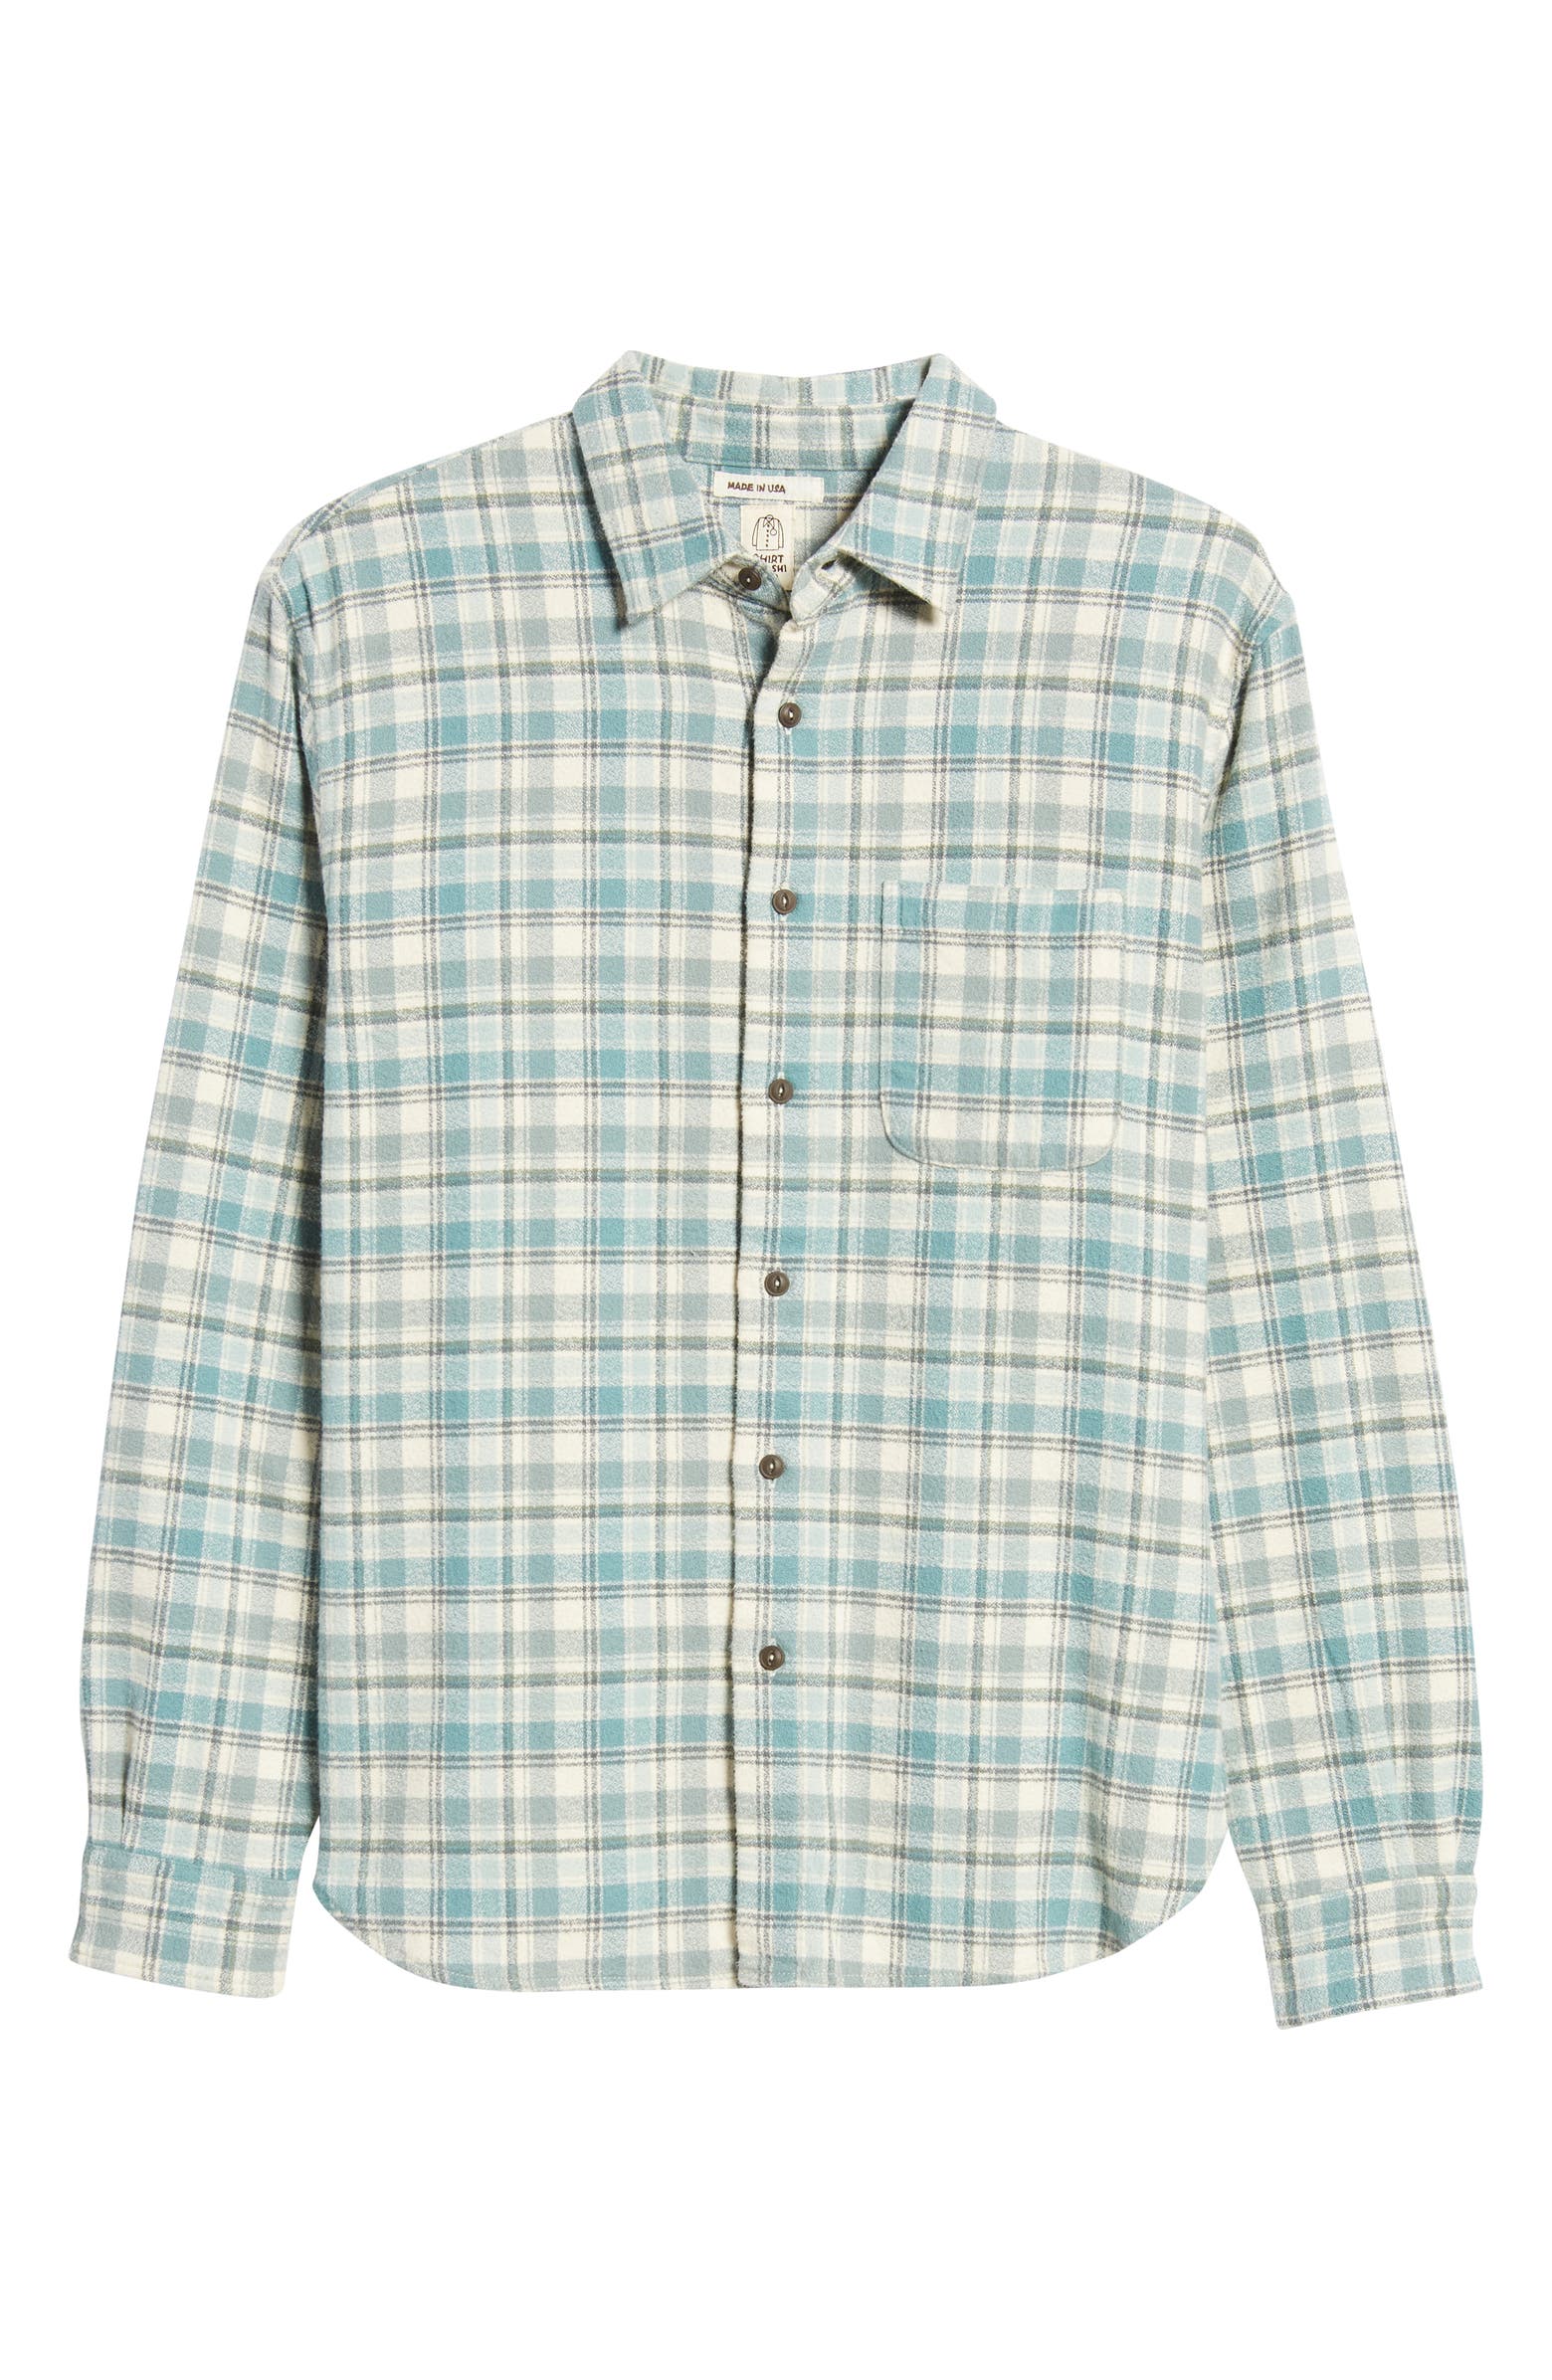 HIROSHI KATO The Ripper Plaid Cotton Flannel Button-Up Shirt | Nordstrom